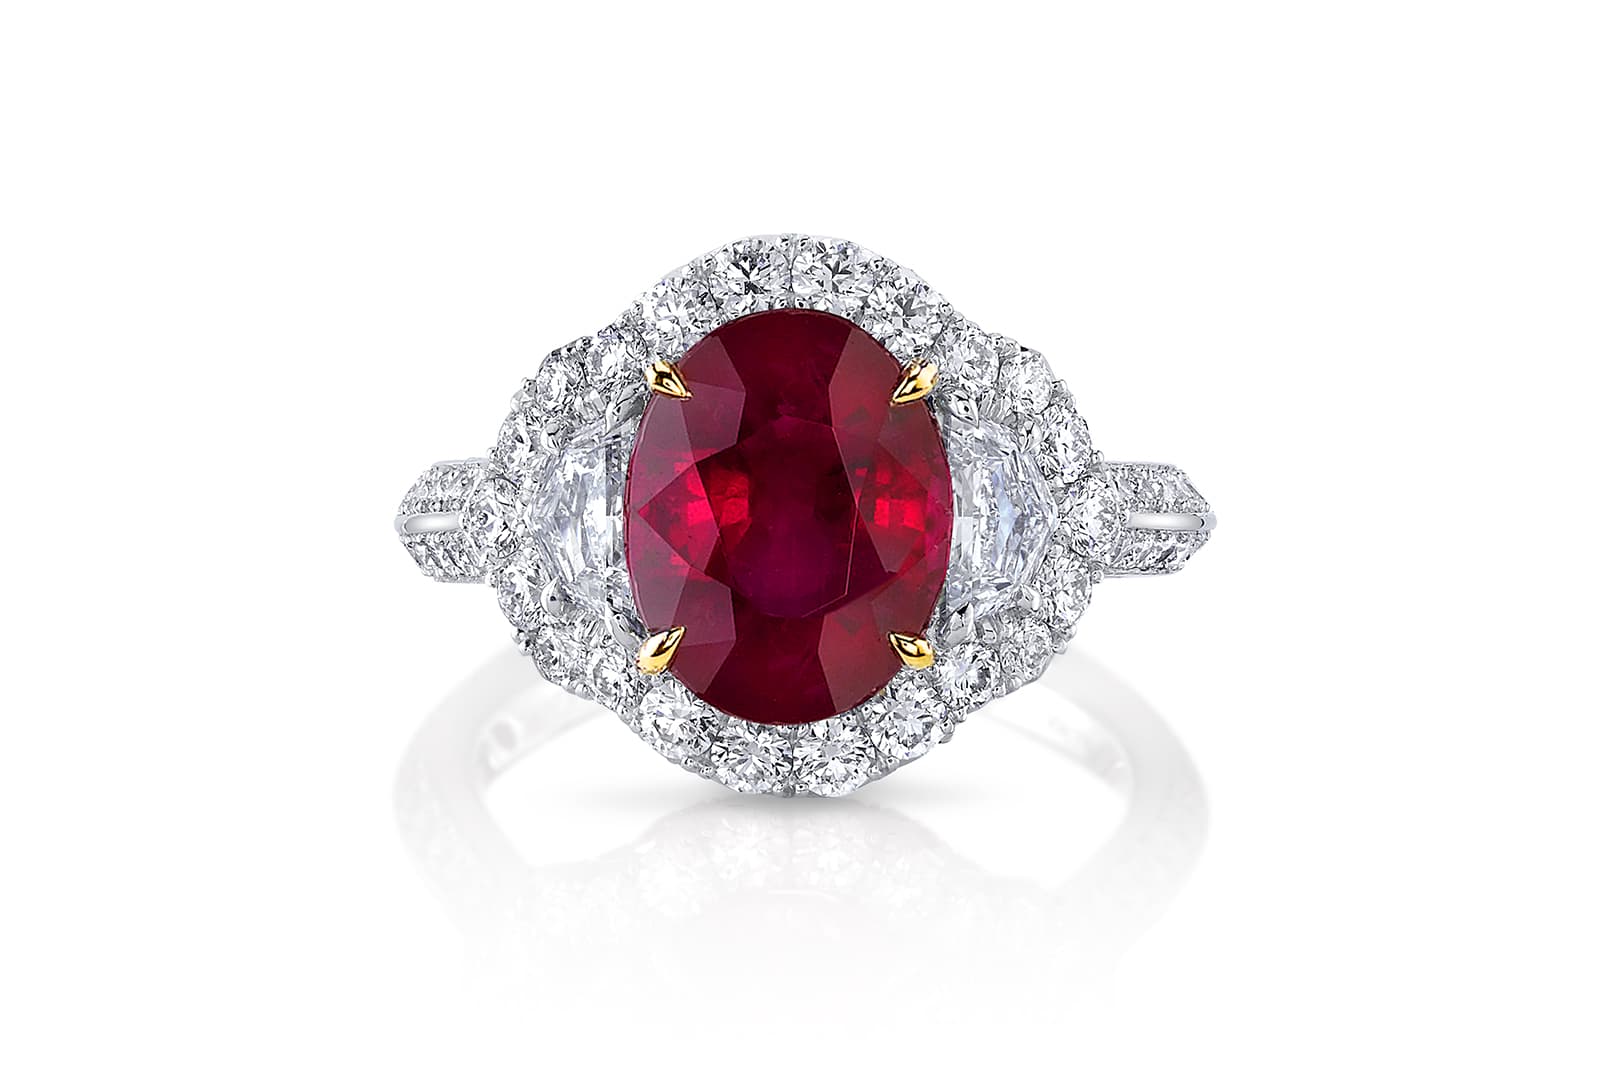 Pretty pink rings by Omi Prive. - Diamonds in the Library